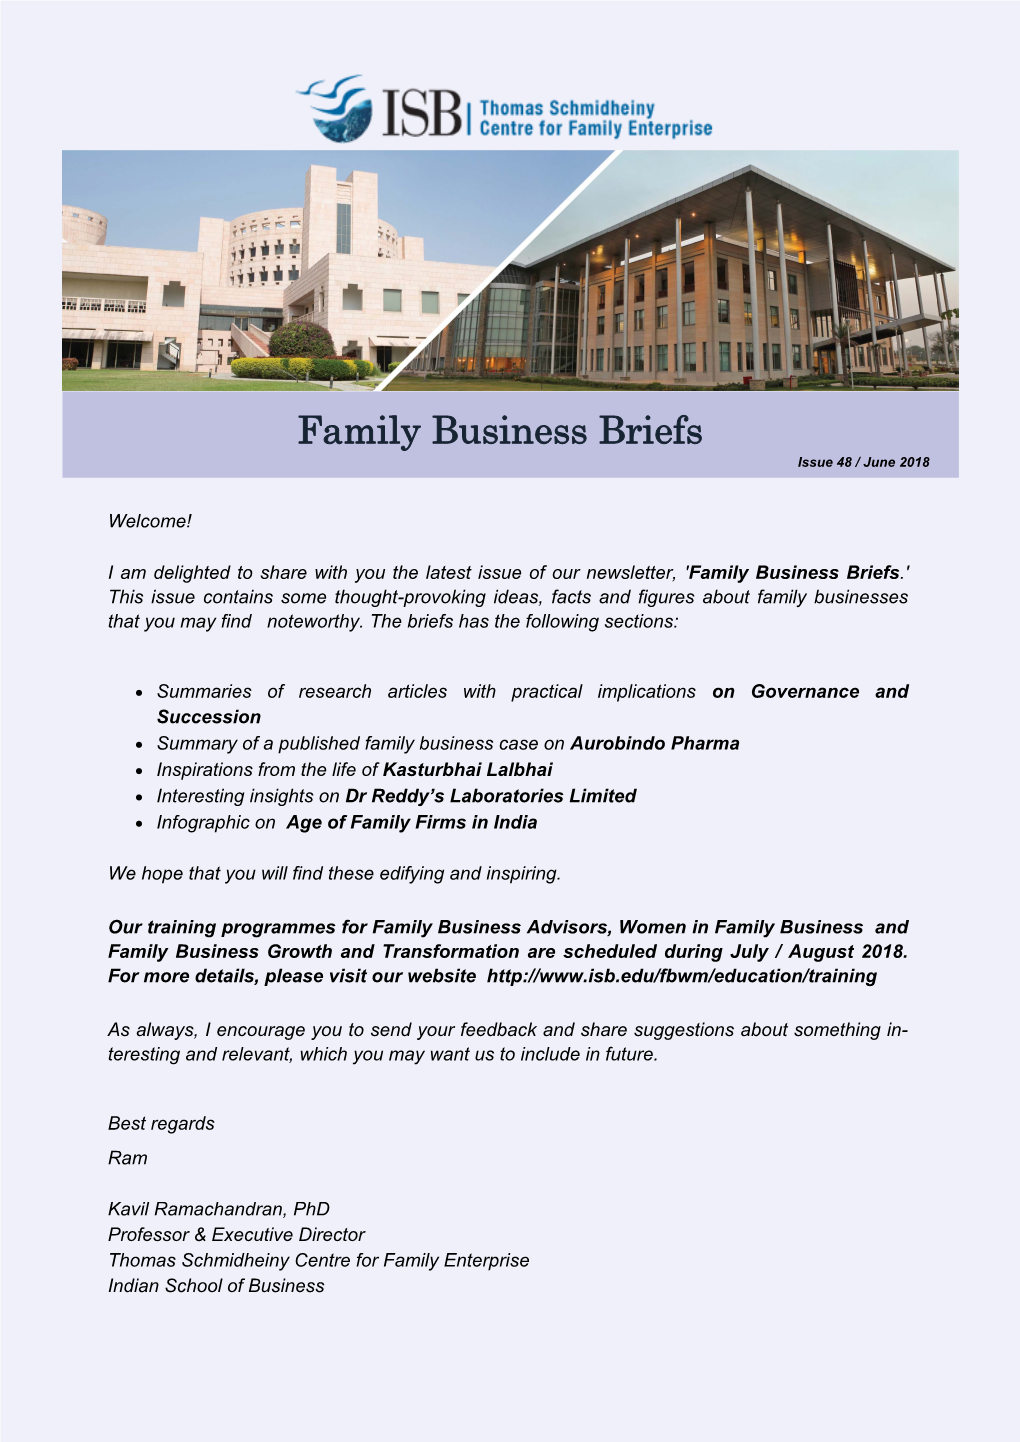 Family Business Briefs Issue 48 / June 2018